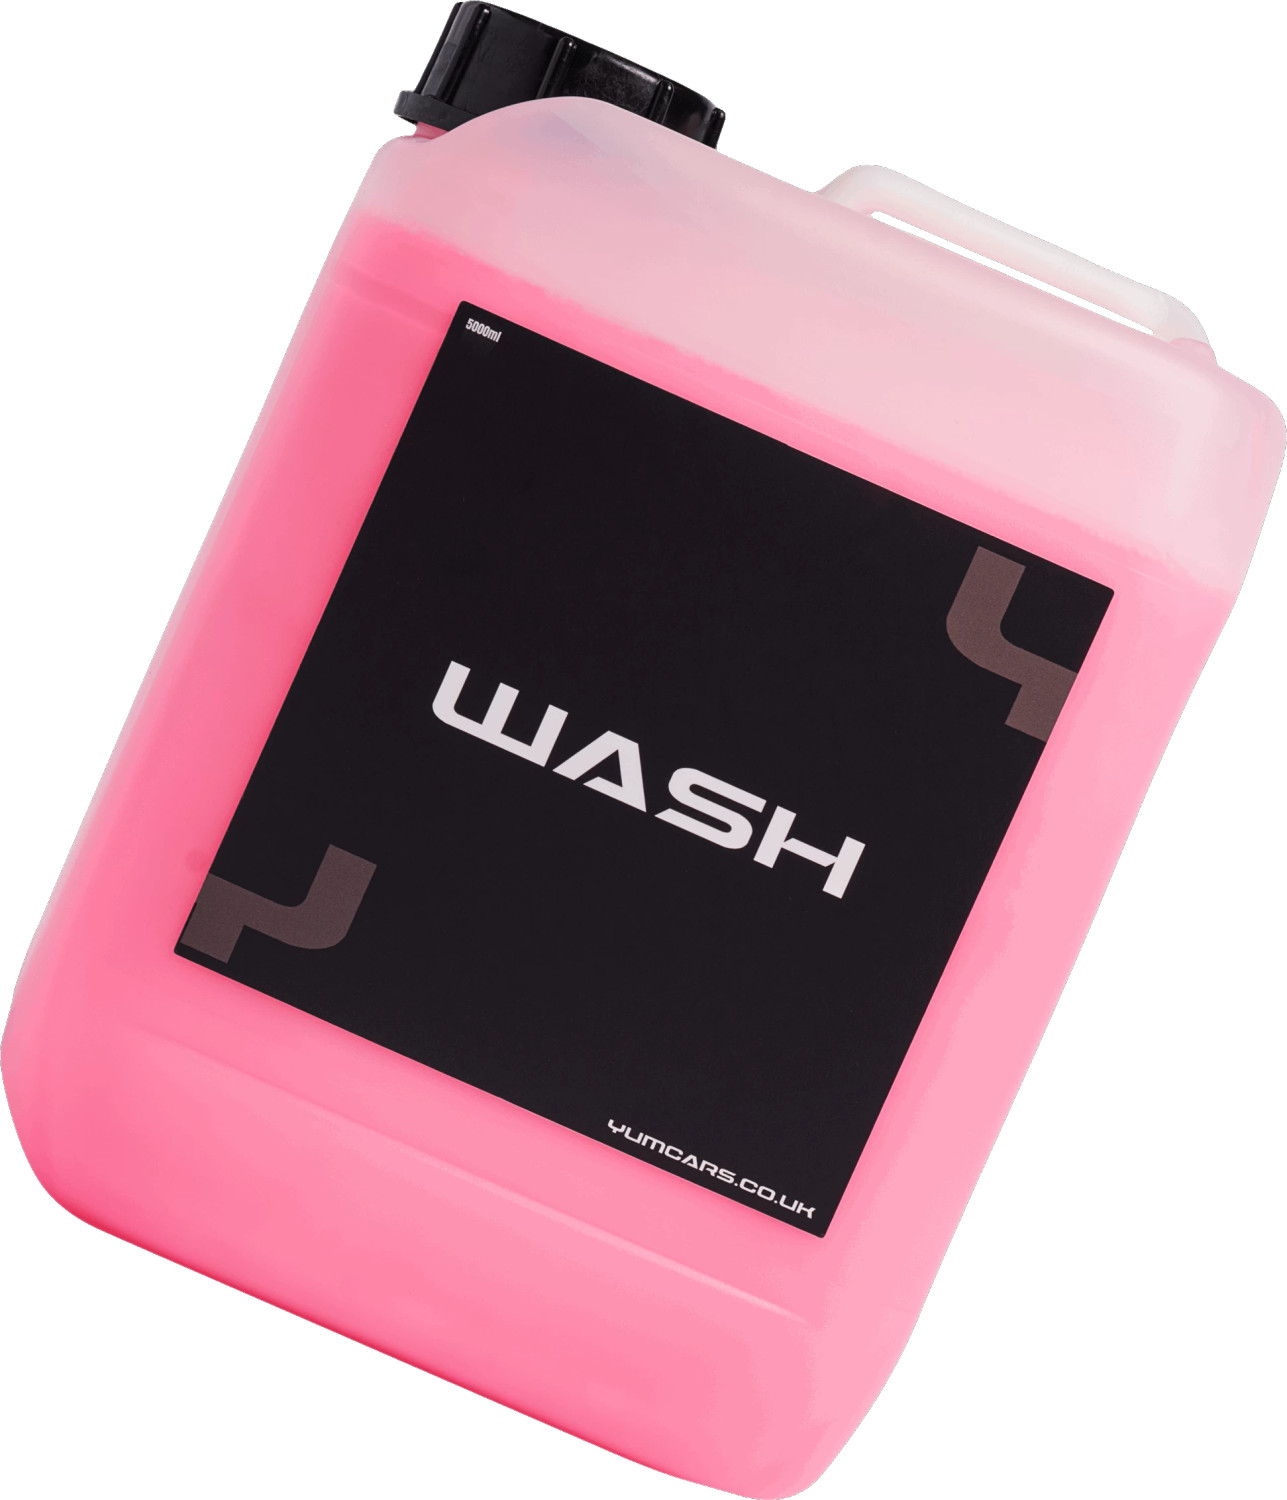 100ml Car Wash Shampoo Ceramic Coating Car Polish Cleaner Quick Remove Dirt  Grime And Grease Car Detailing Cleaning Tools